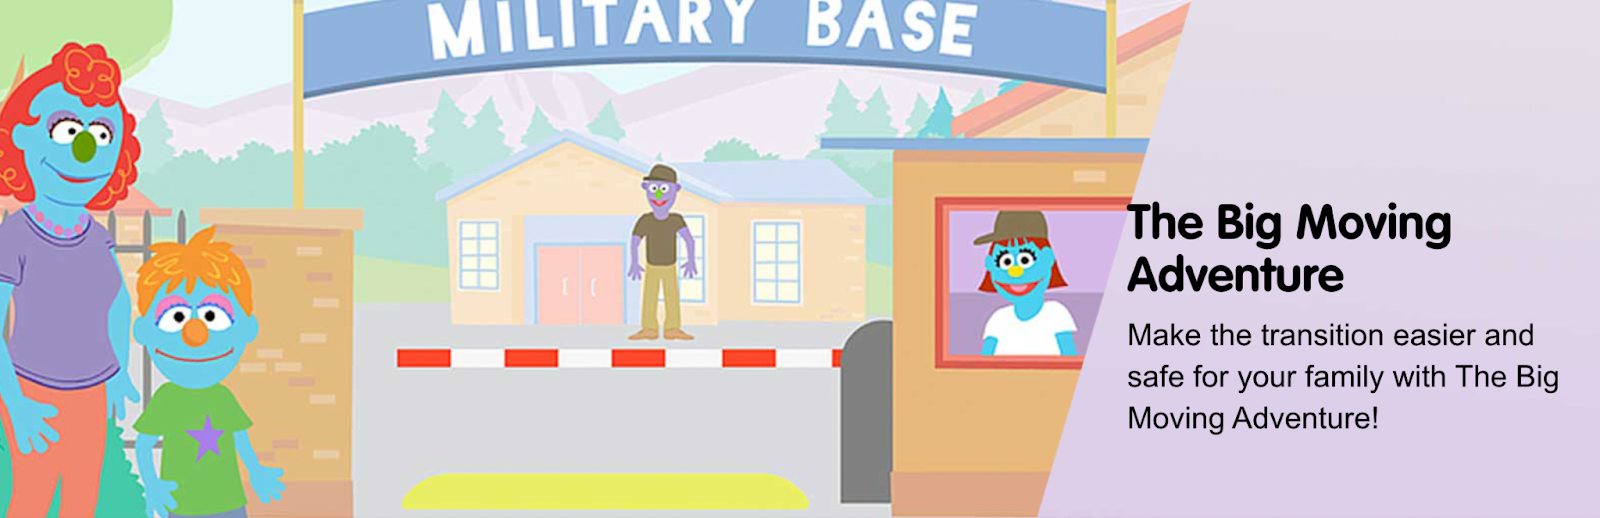 Sesame Street launches a new series on difficult topics for military kids